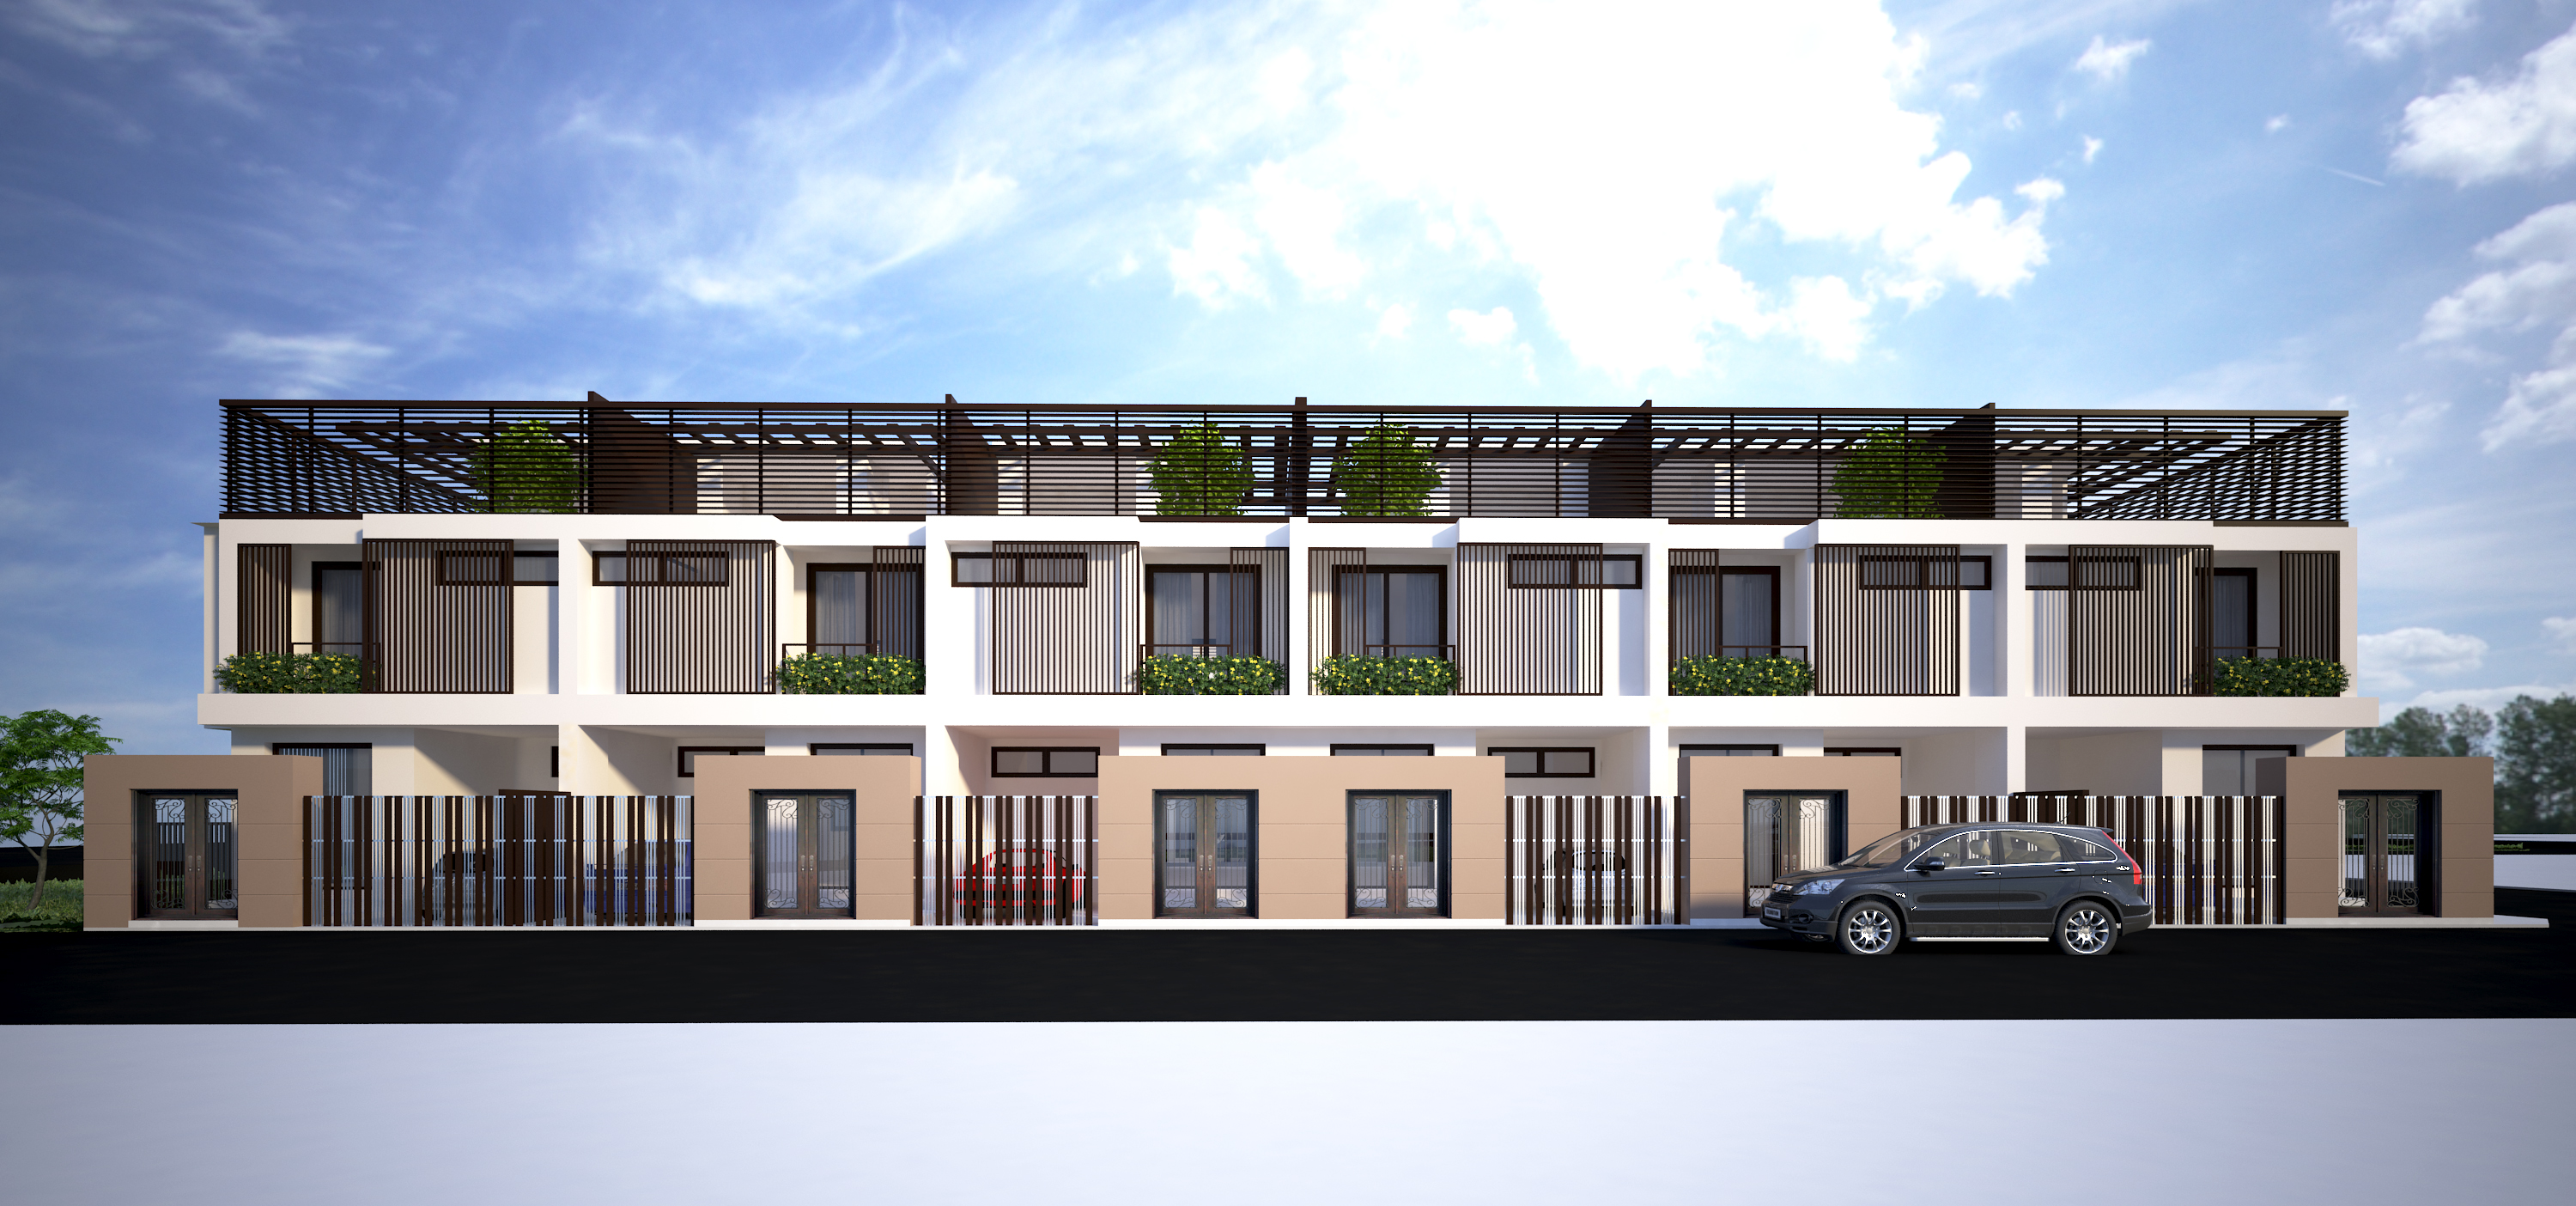 1-townhome-front